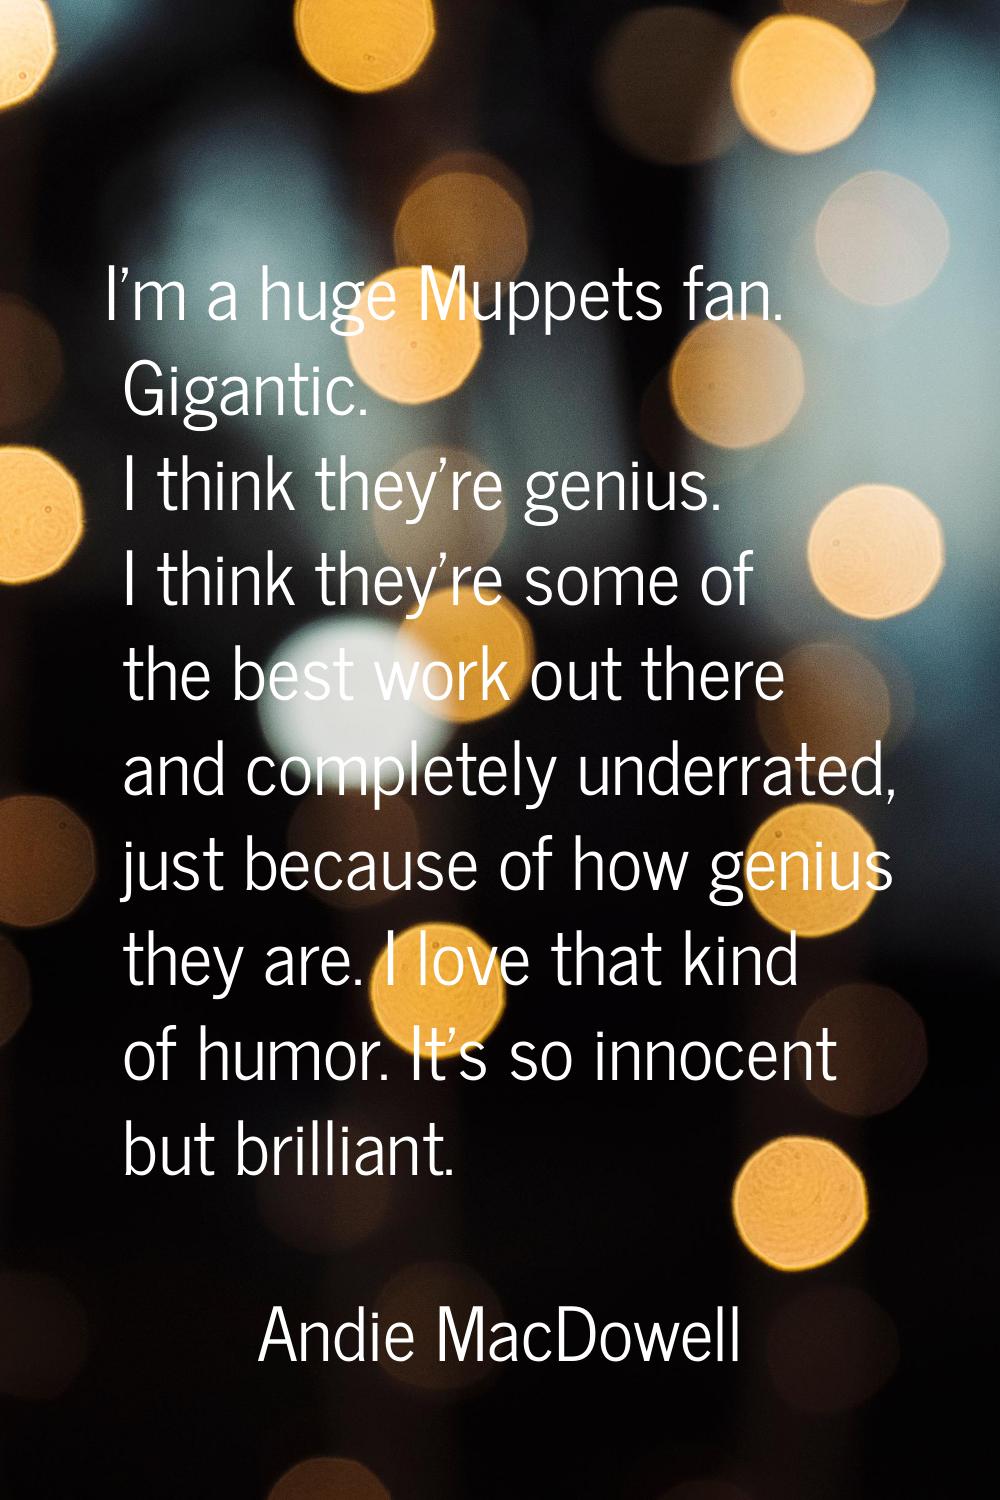 I'm a huge Muppets fan. Gigantic. I think they're genius. I think they're some of the best work out